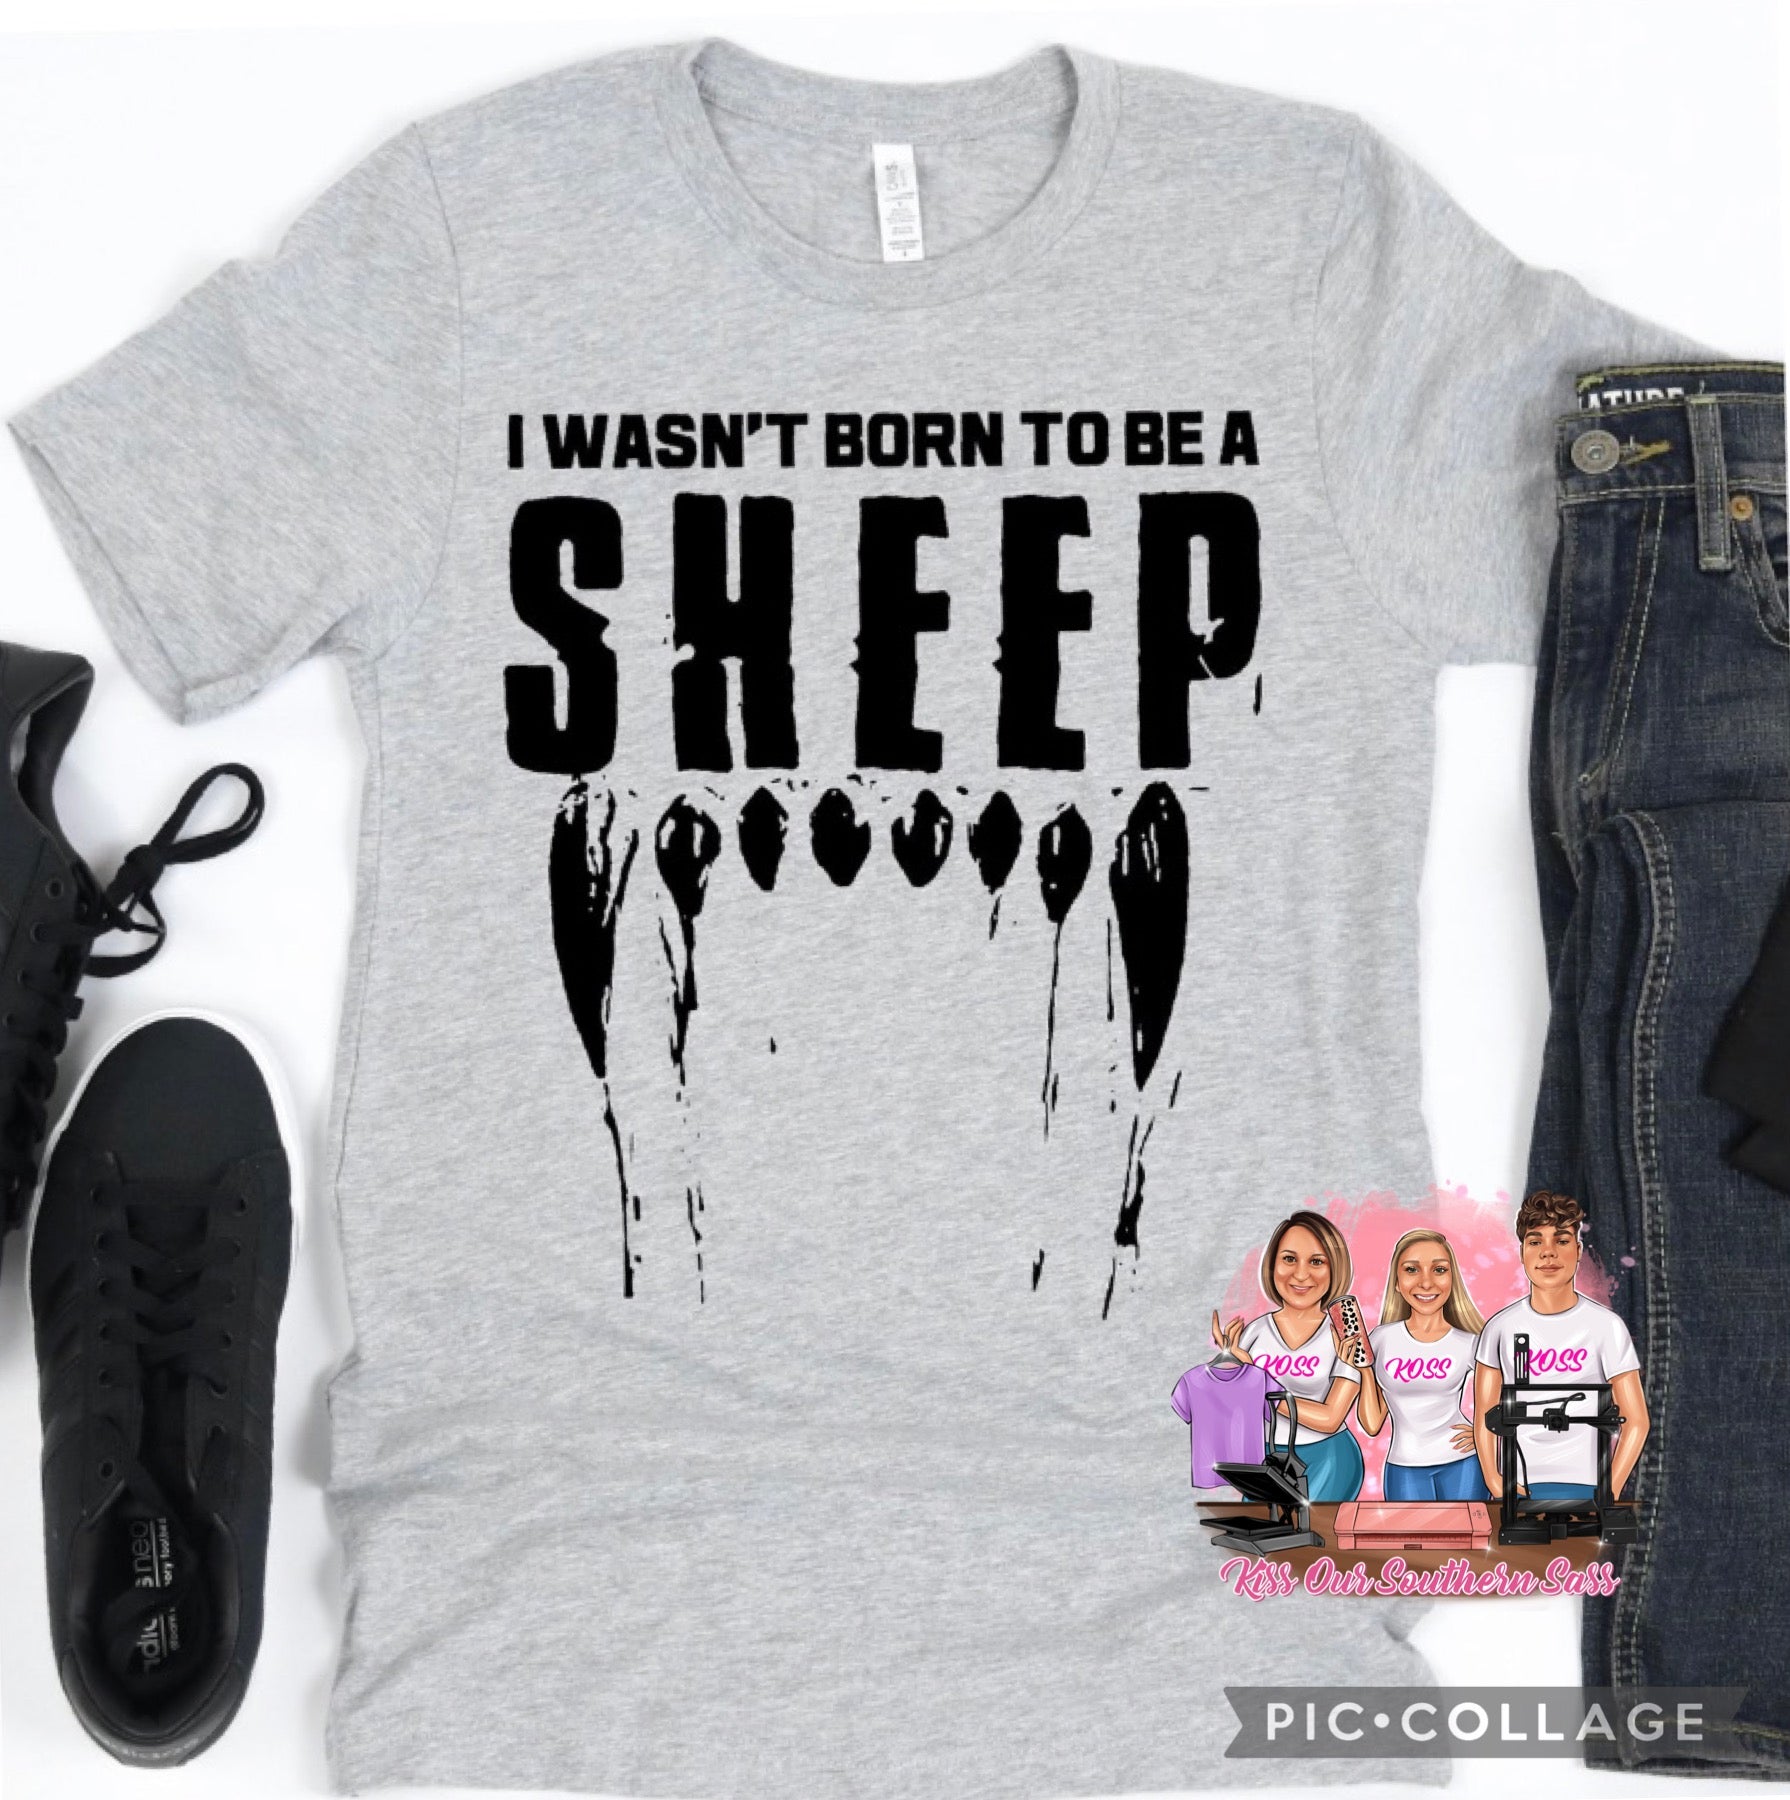 I Wasn't Born to be a Sheep